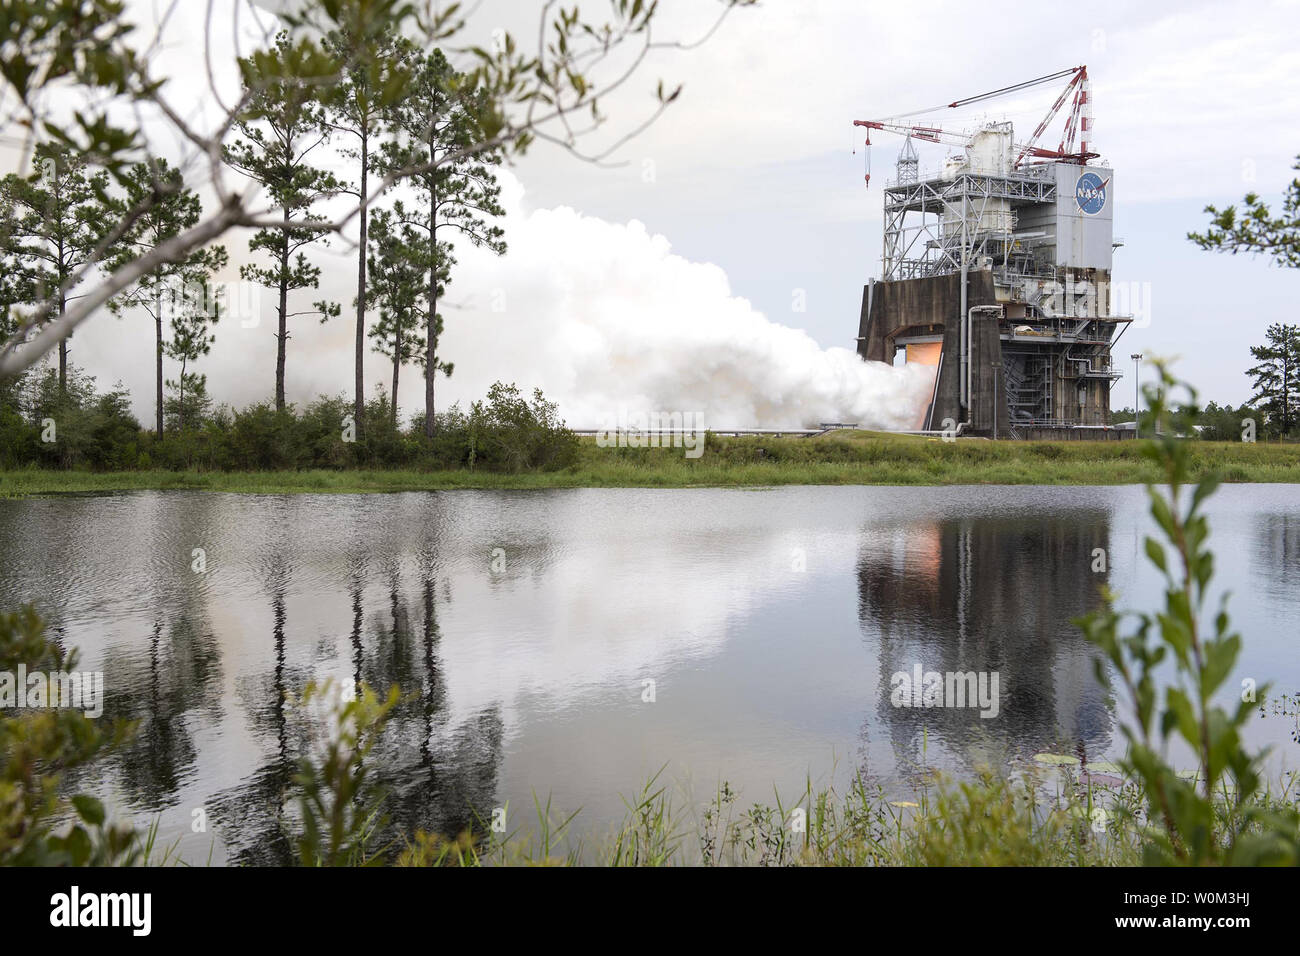 NASA engineers conducted a successful 500-second test of RS-25 flight controller for use on the new Space Launch System (SLS) deep space rocket on the A-1 Test Stand at NASA's Stennis Space Center near Bay St. Louis, Mississippi, on July 25, 2017. The test involved installing the controller unit on an RS-25 development engine and firing it in the same manner, and for the same length of time, as needed during launch. The controller is the key modification to the engines and is characterized as the 'brain' that provides precision control of engine operation and internal health diagnostics, and a Stock Photo